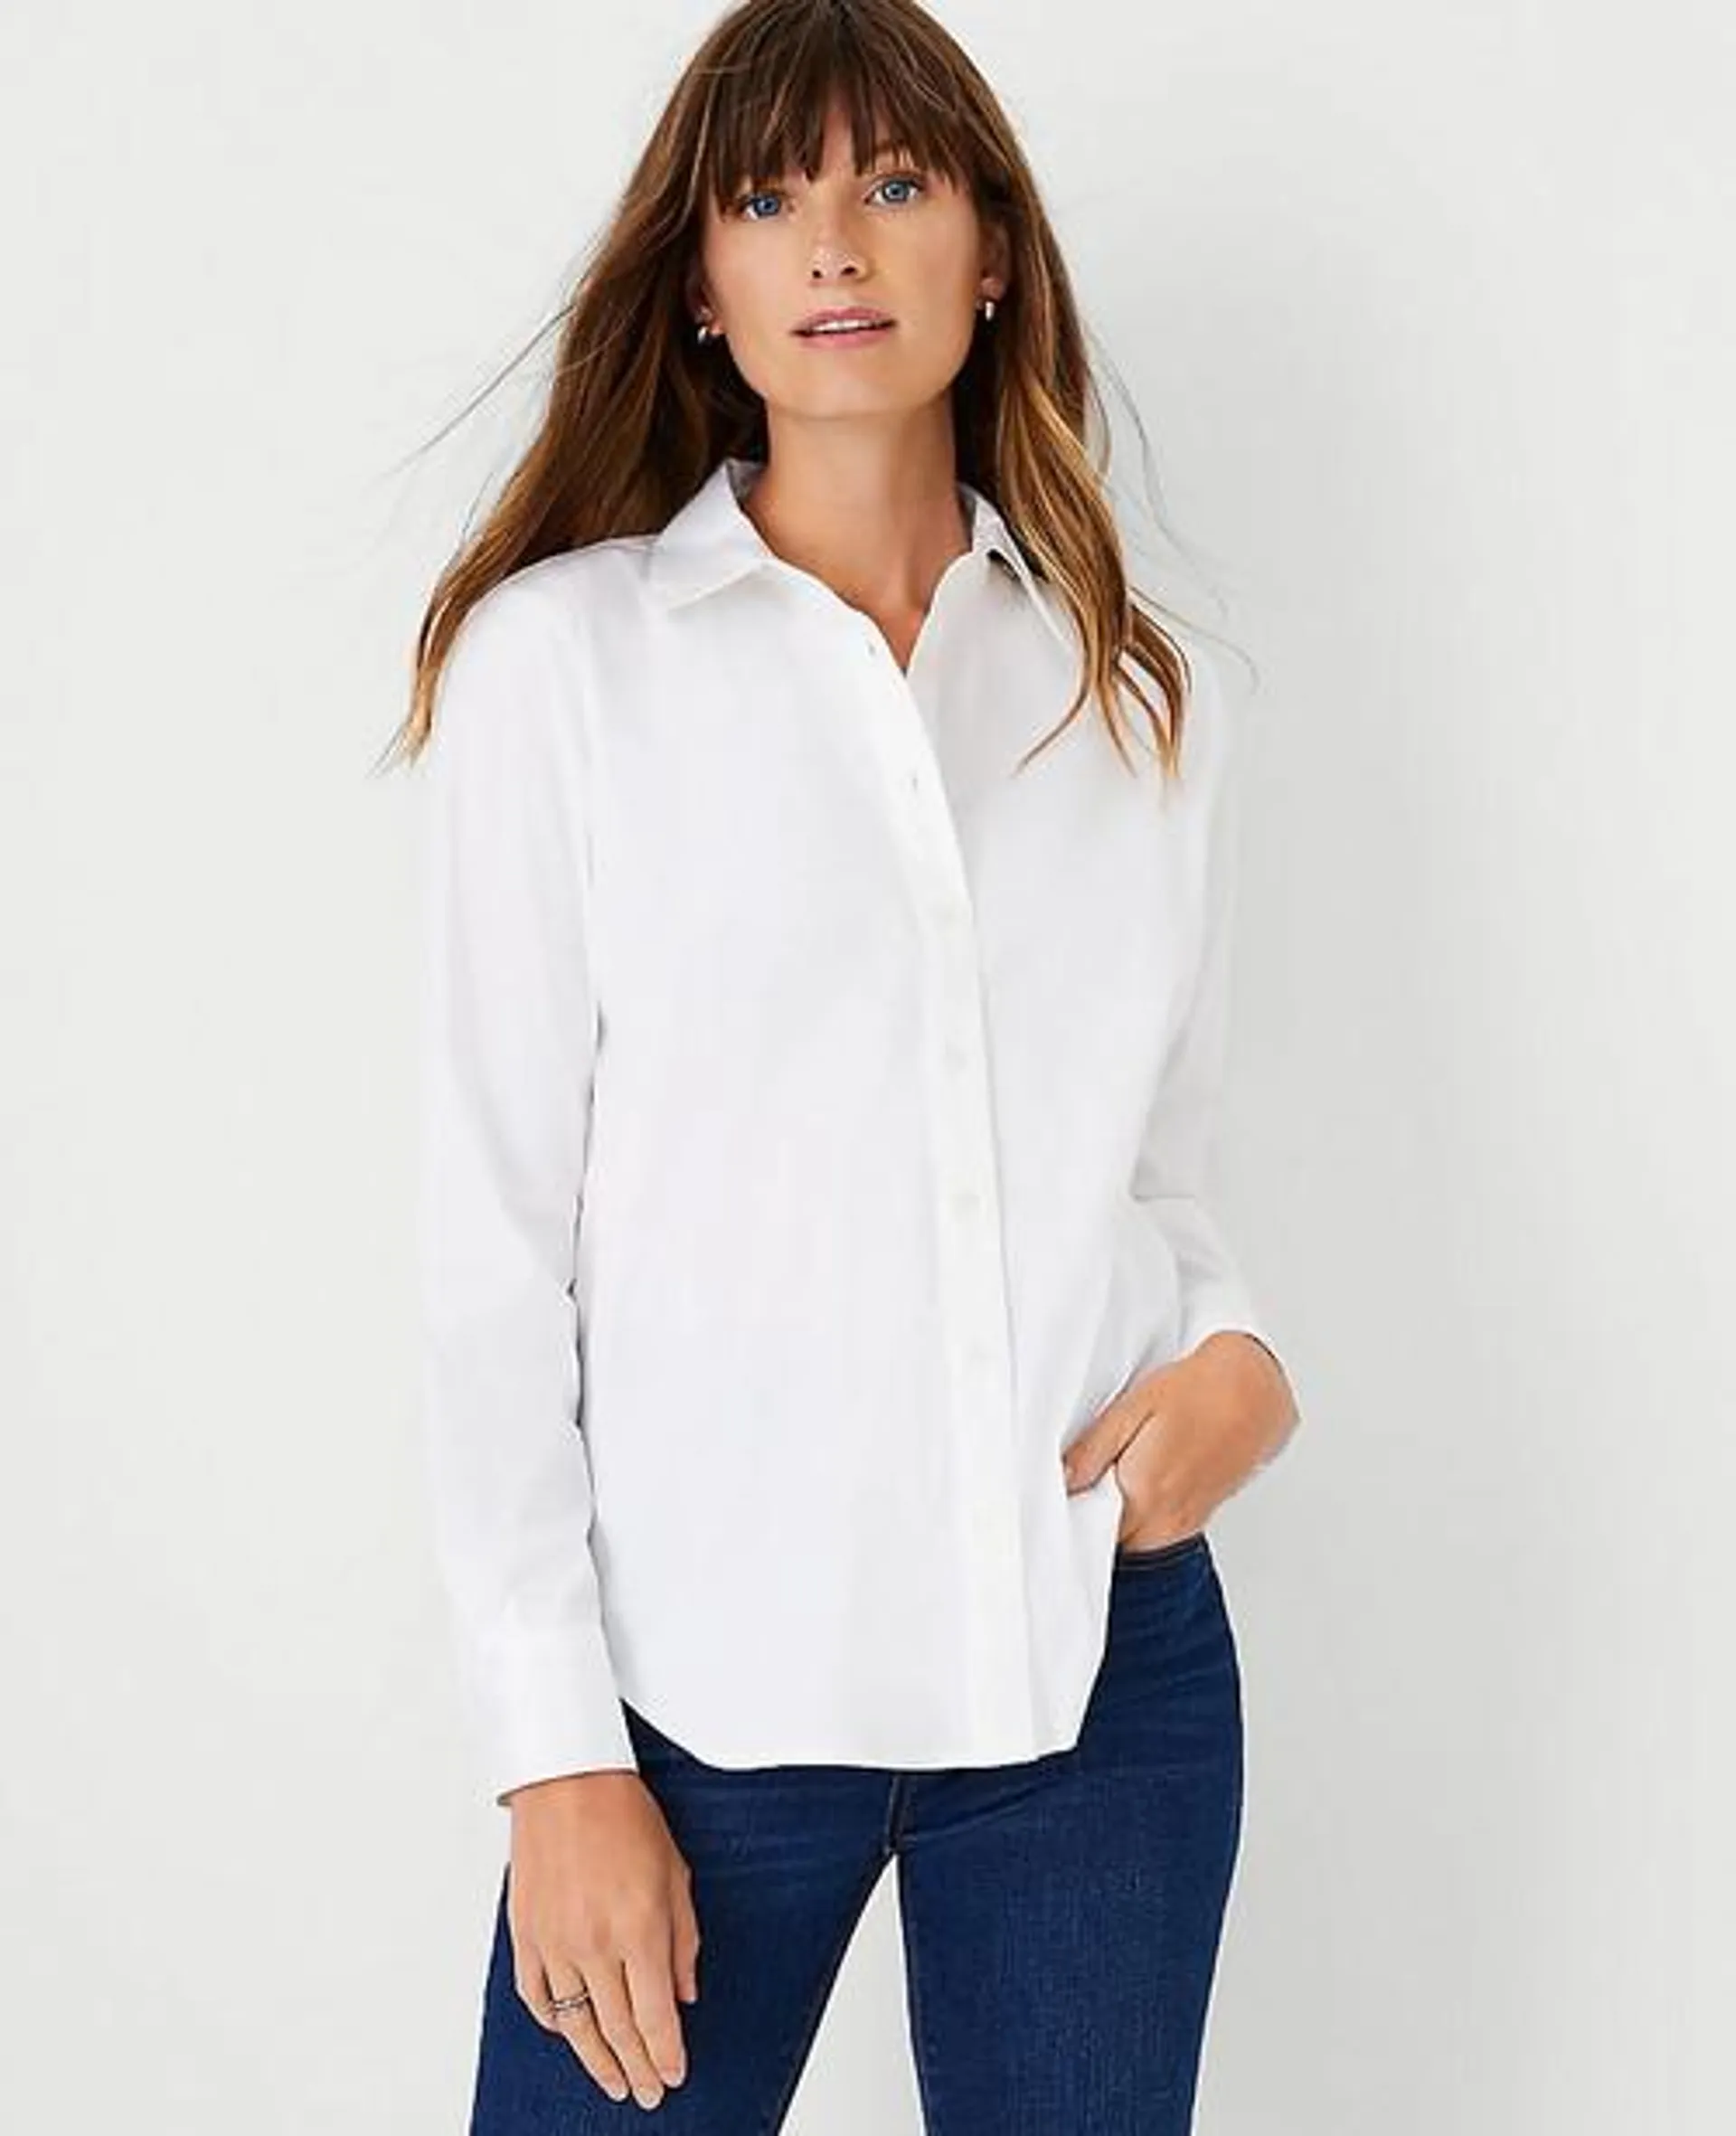 Camisas Ann Taylor Relaxed Perfect Blancos | 675039-NCM